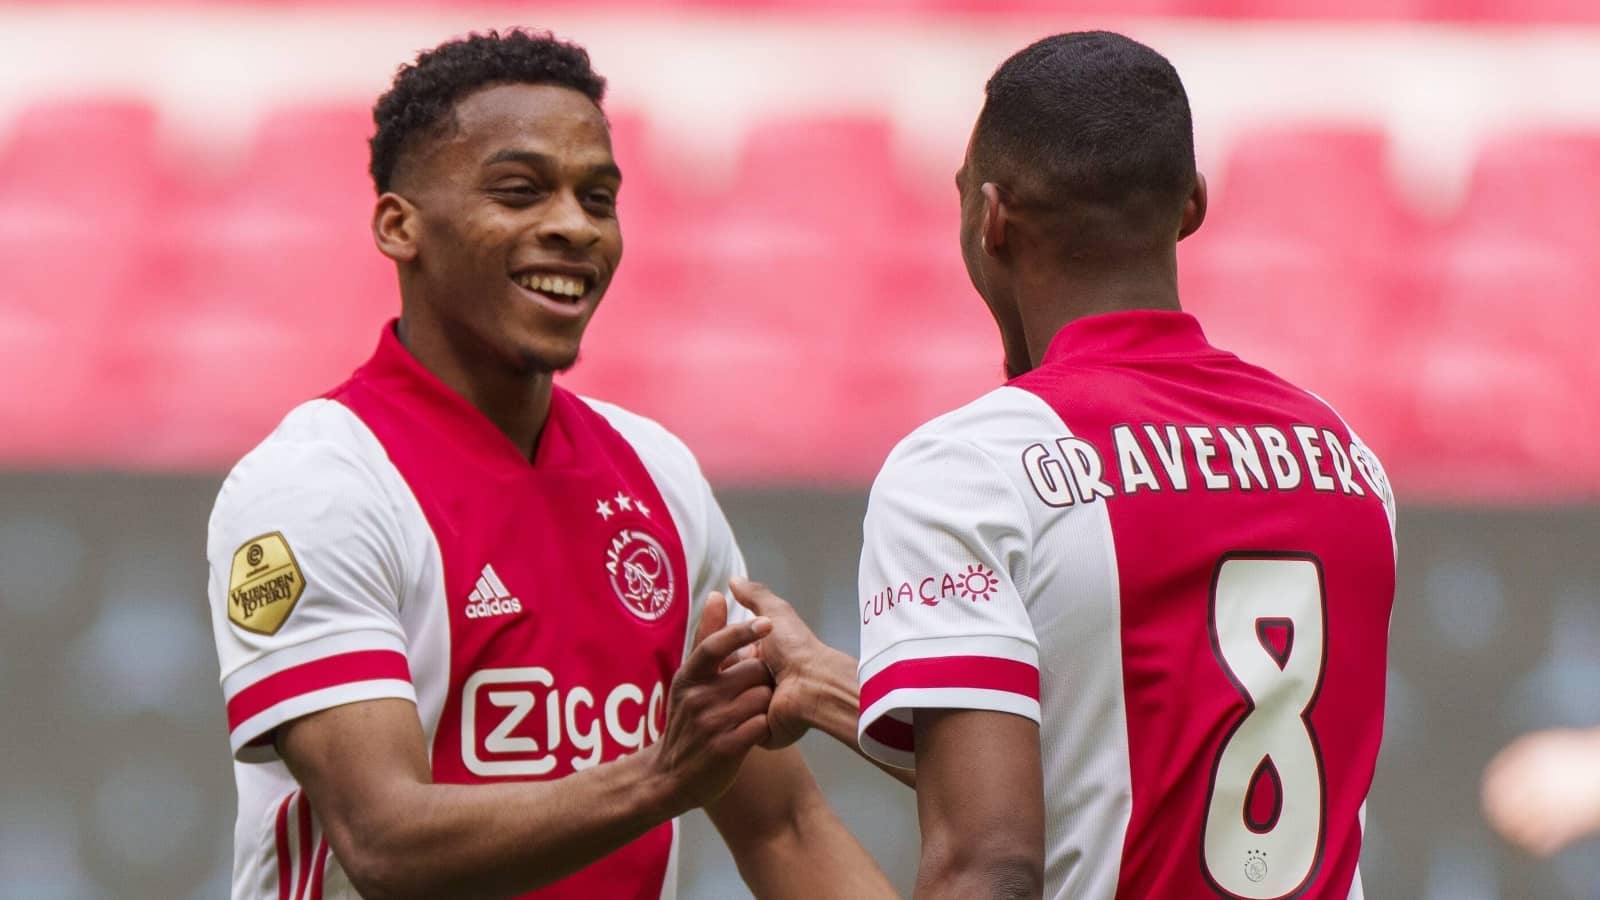 Erik ten Hag wants Man Utd to sign three more Ajax stars to complete set of five at Old Trafford